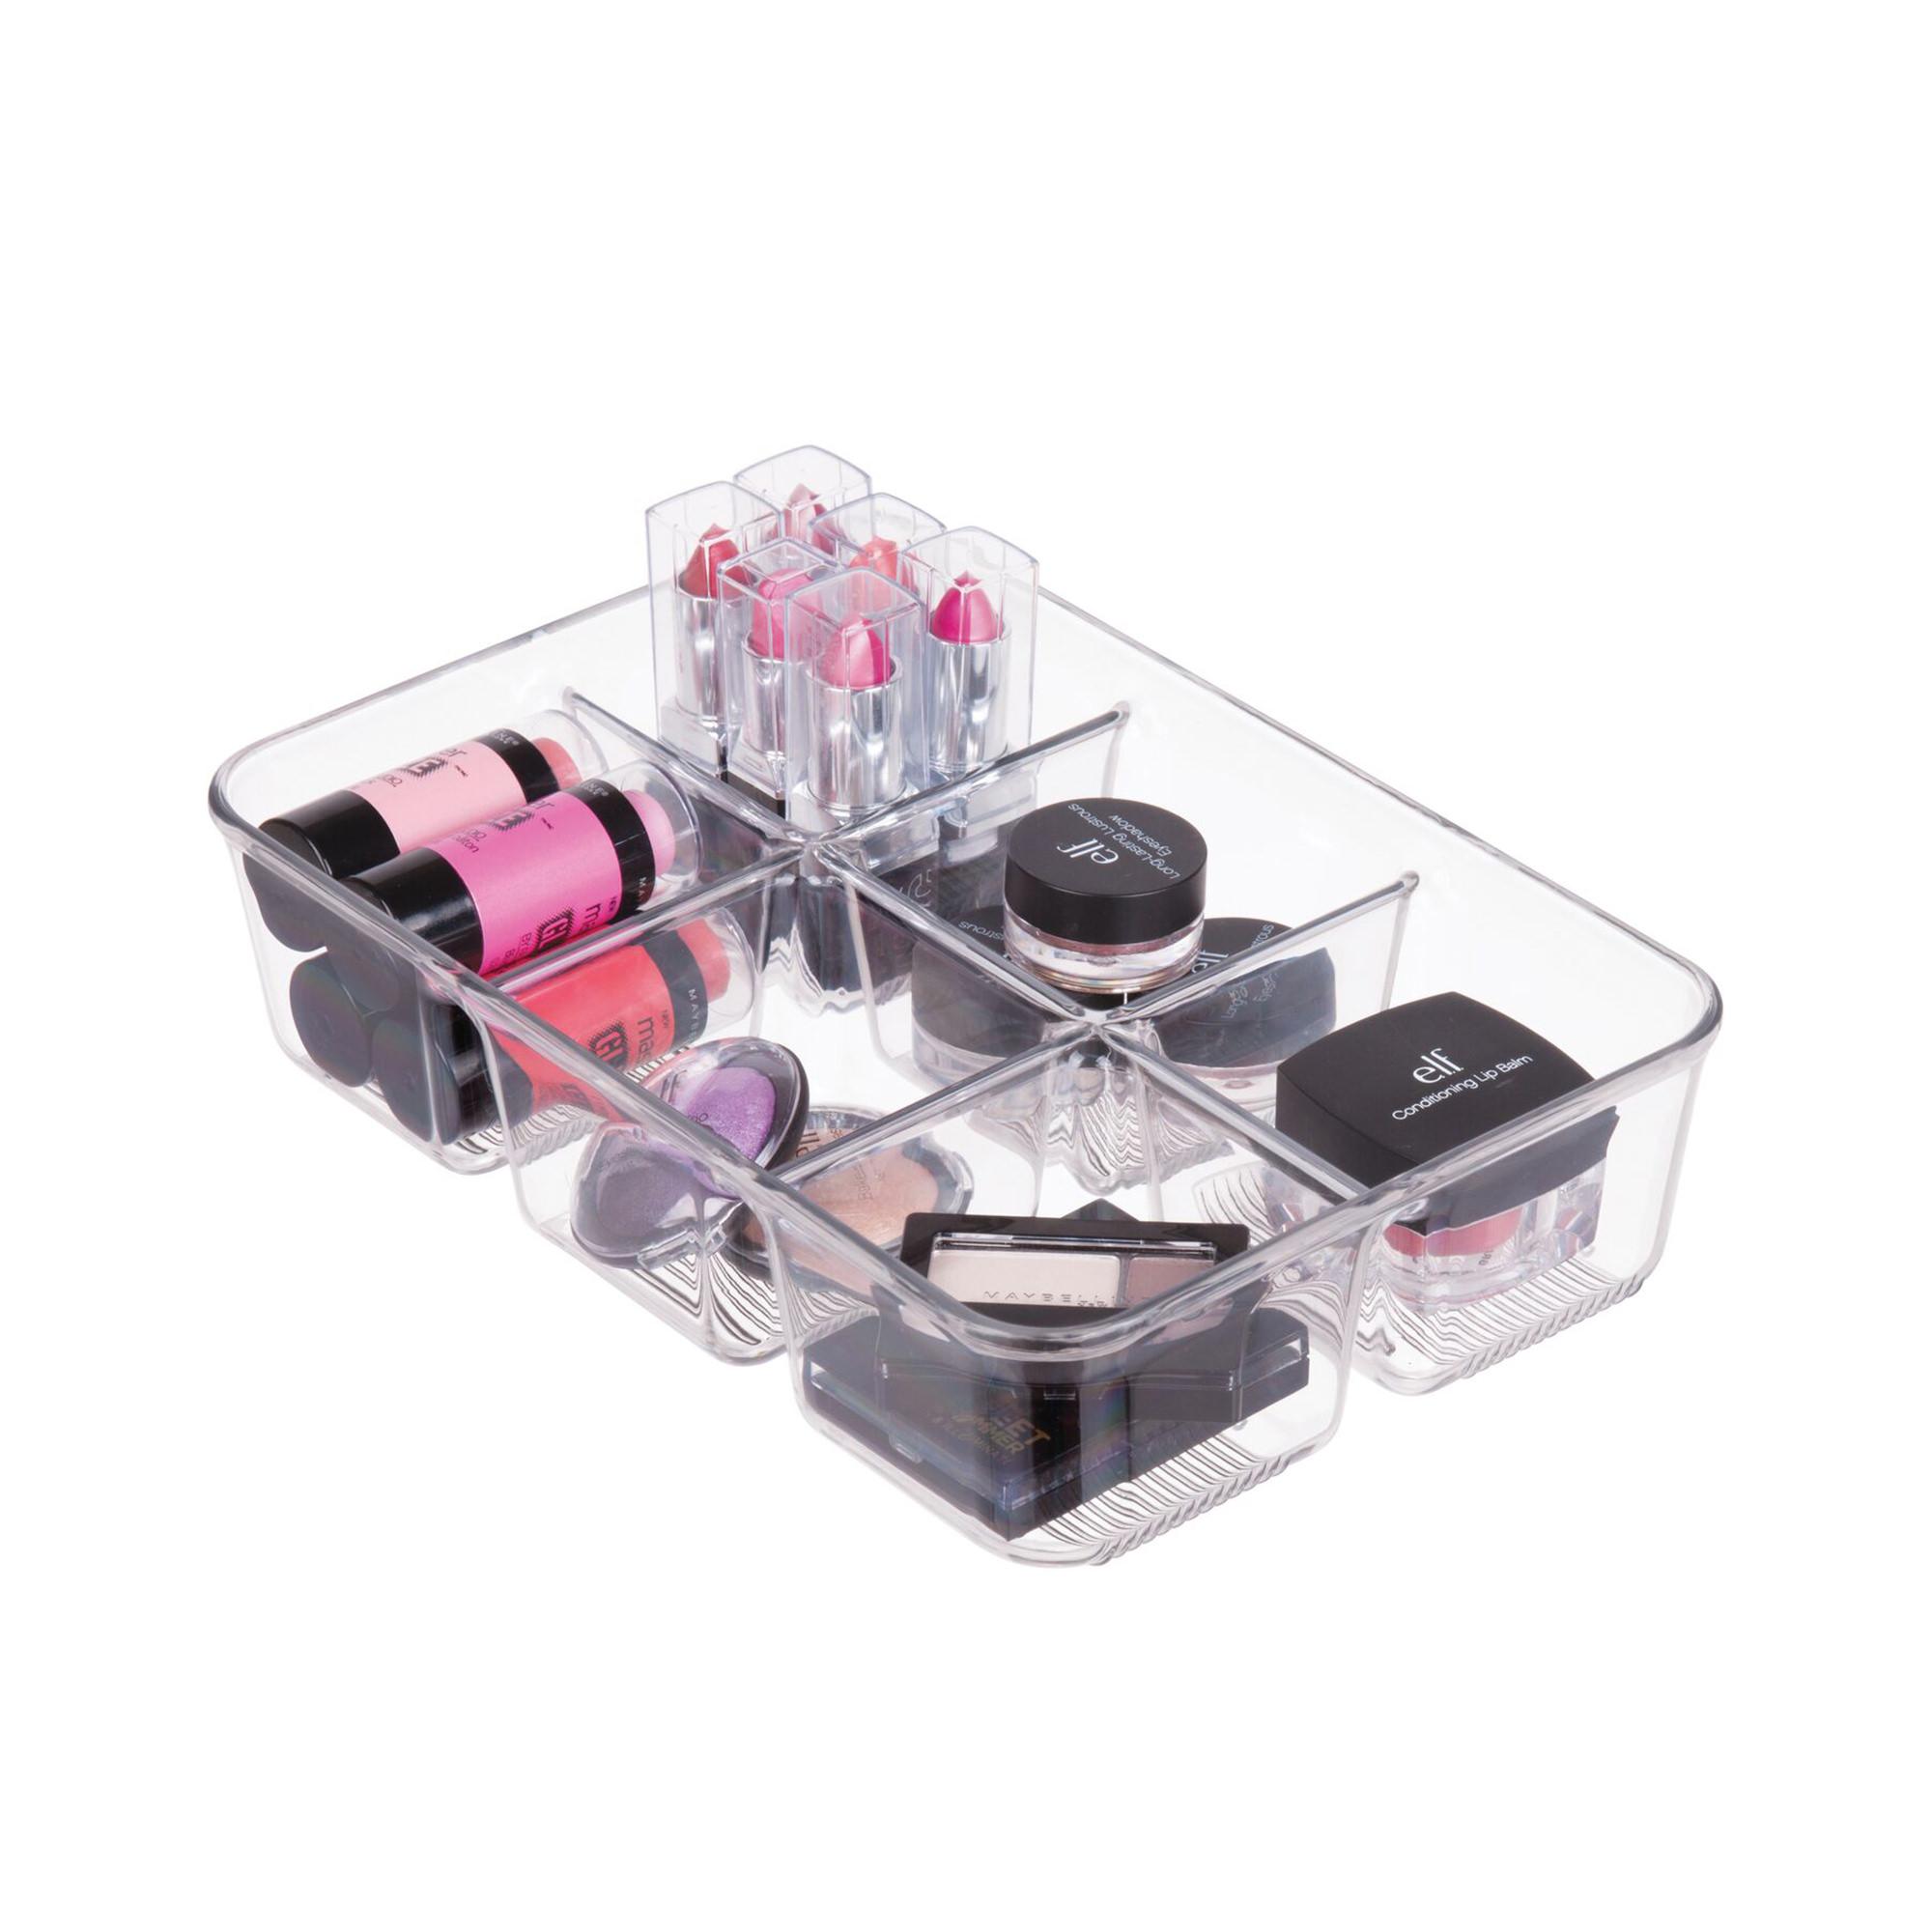 iDesign Linus Pack Organiser 6 Compartment Clear Image 6